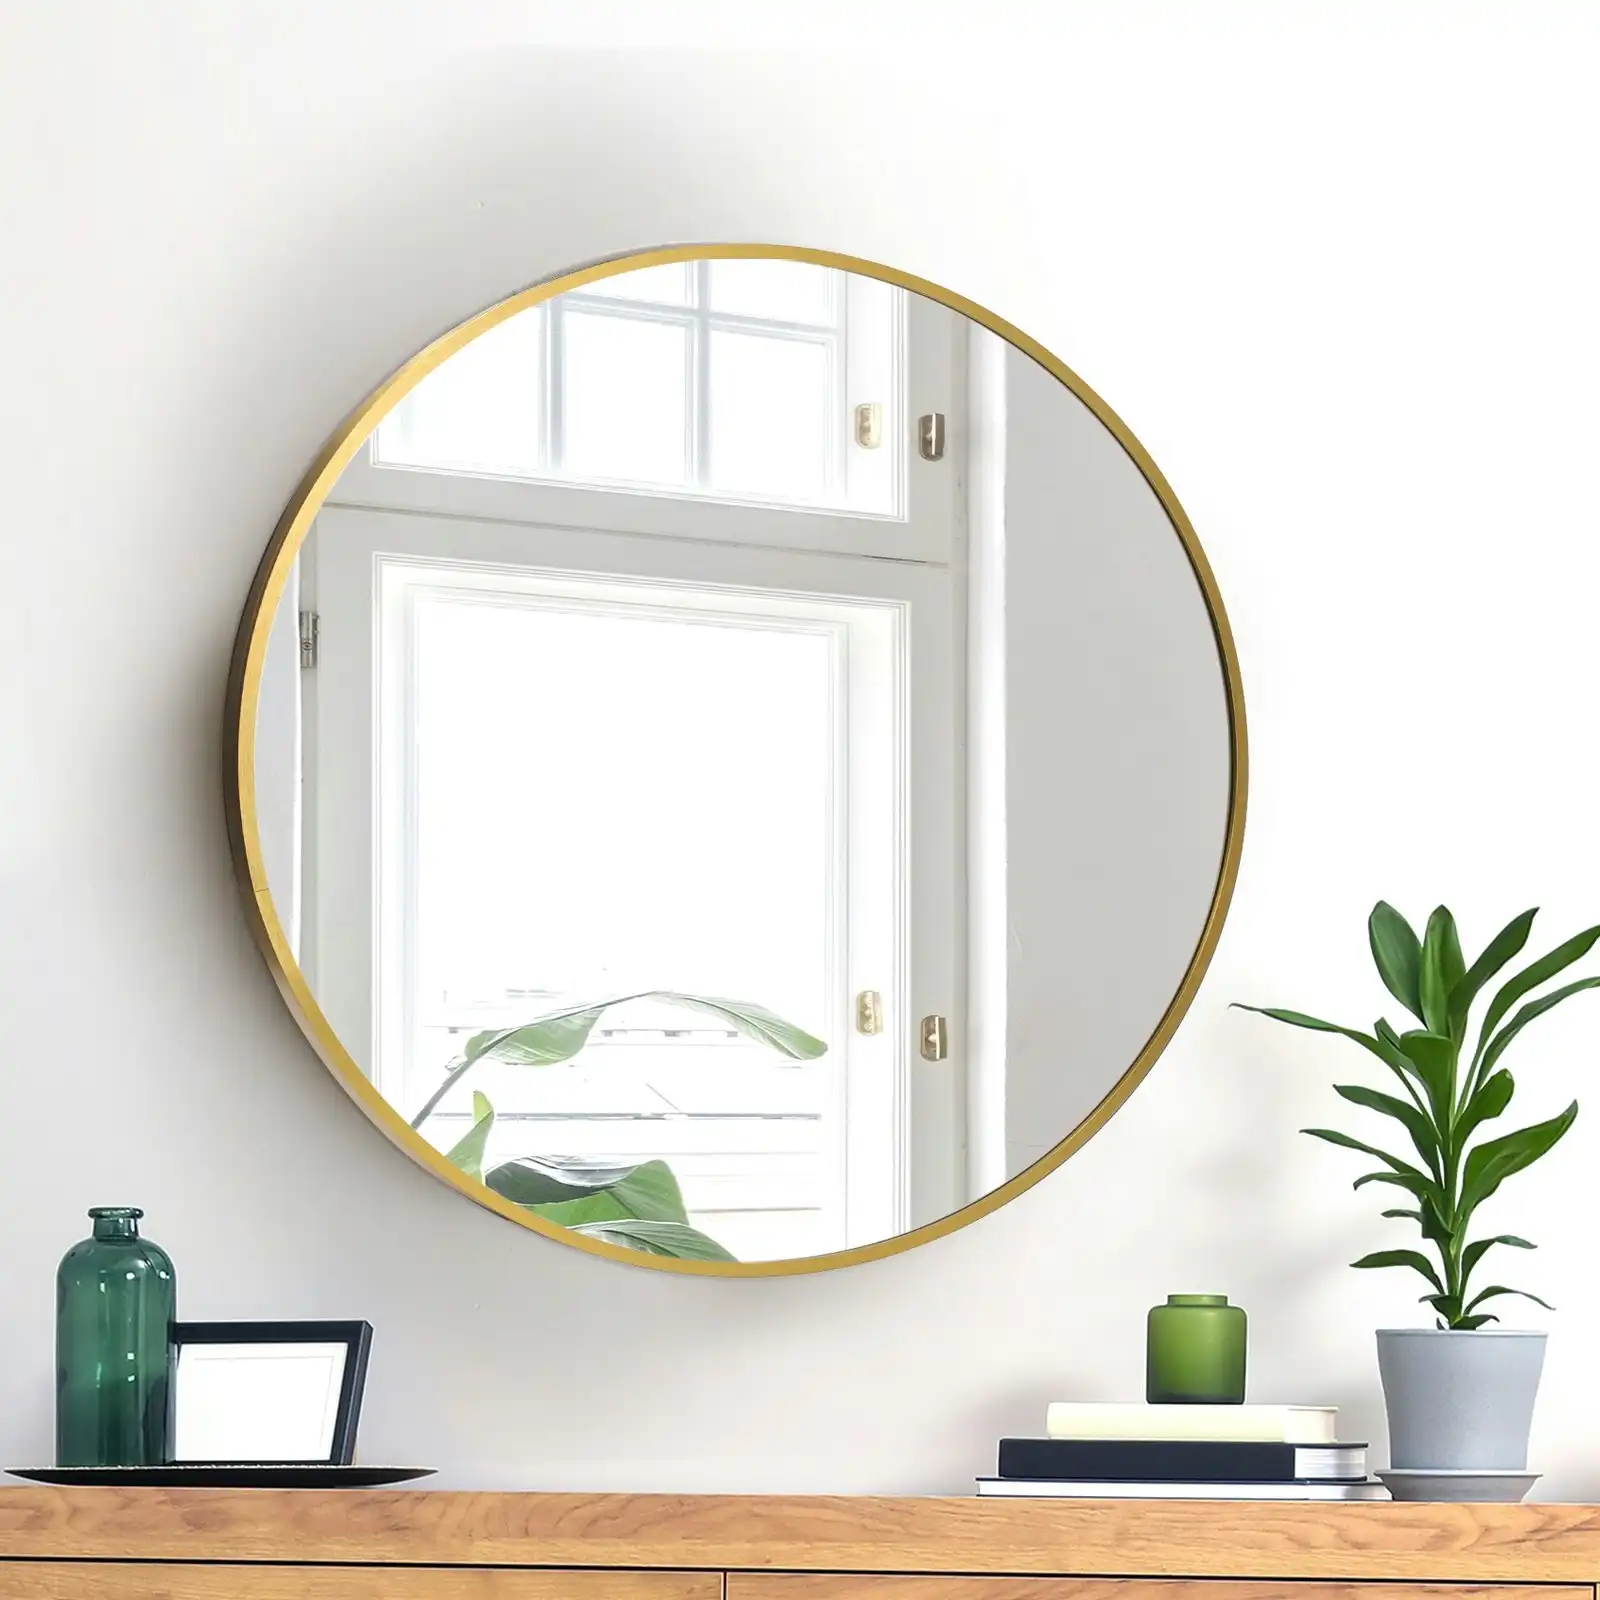 Oikiture Wall Mirrors Round Makeup Mirror Vanity Home Decor 50cm Gold Bedroom